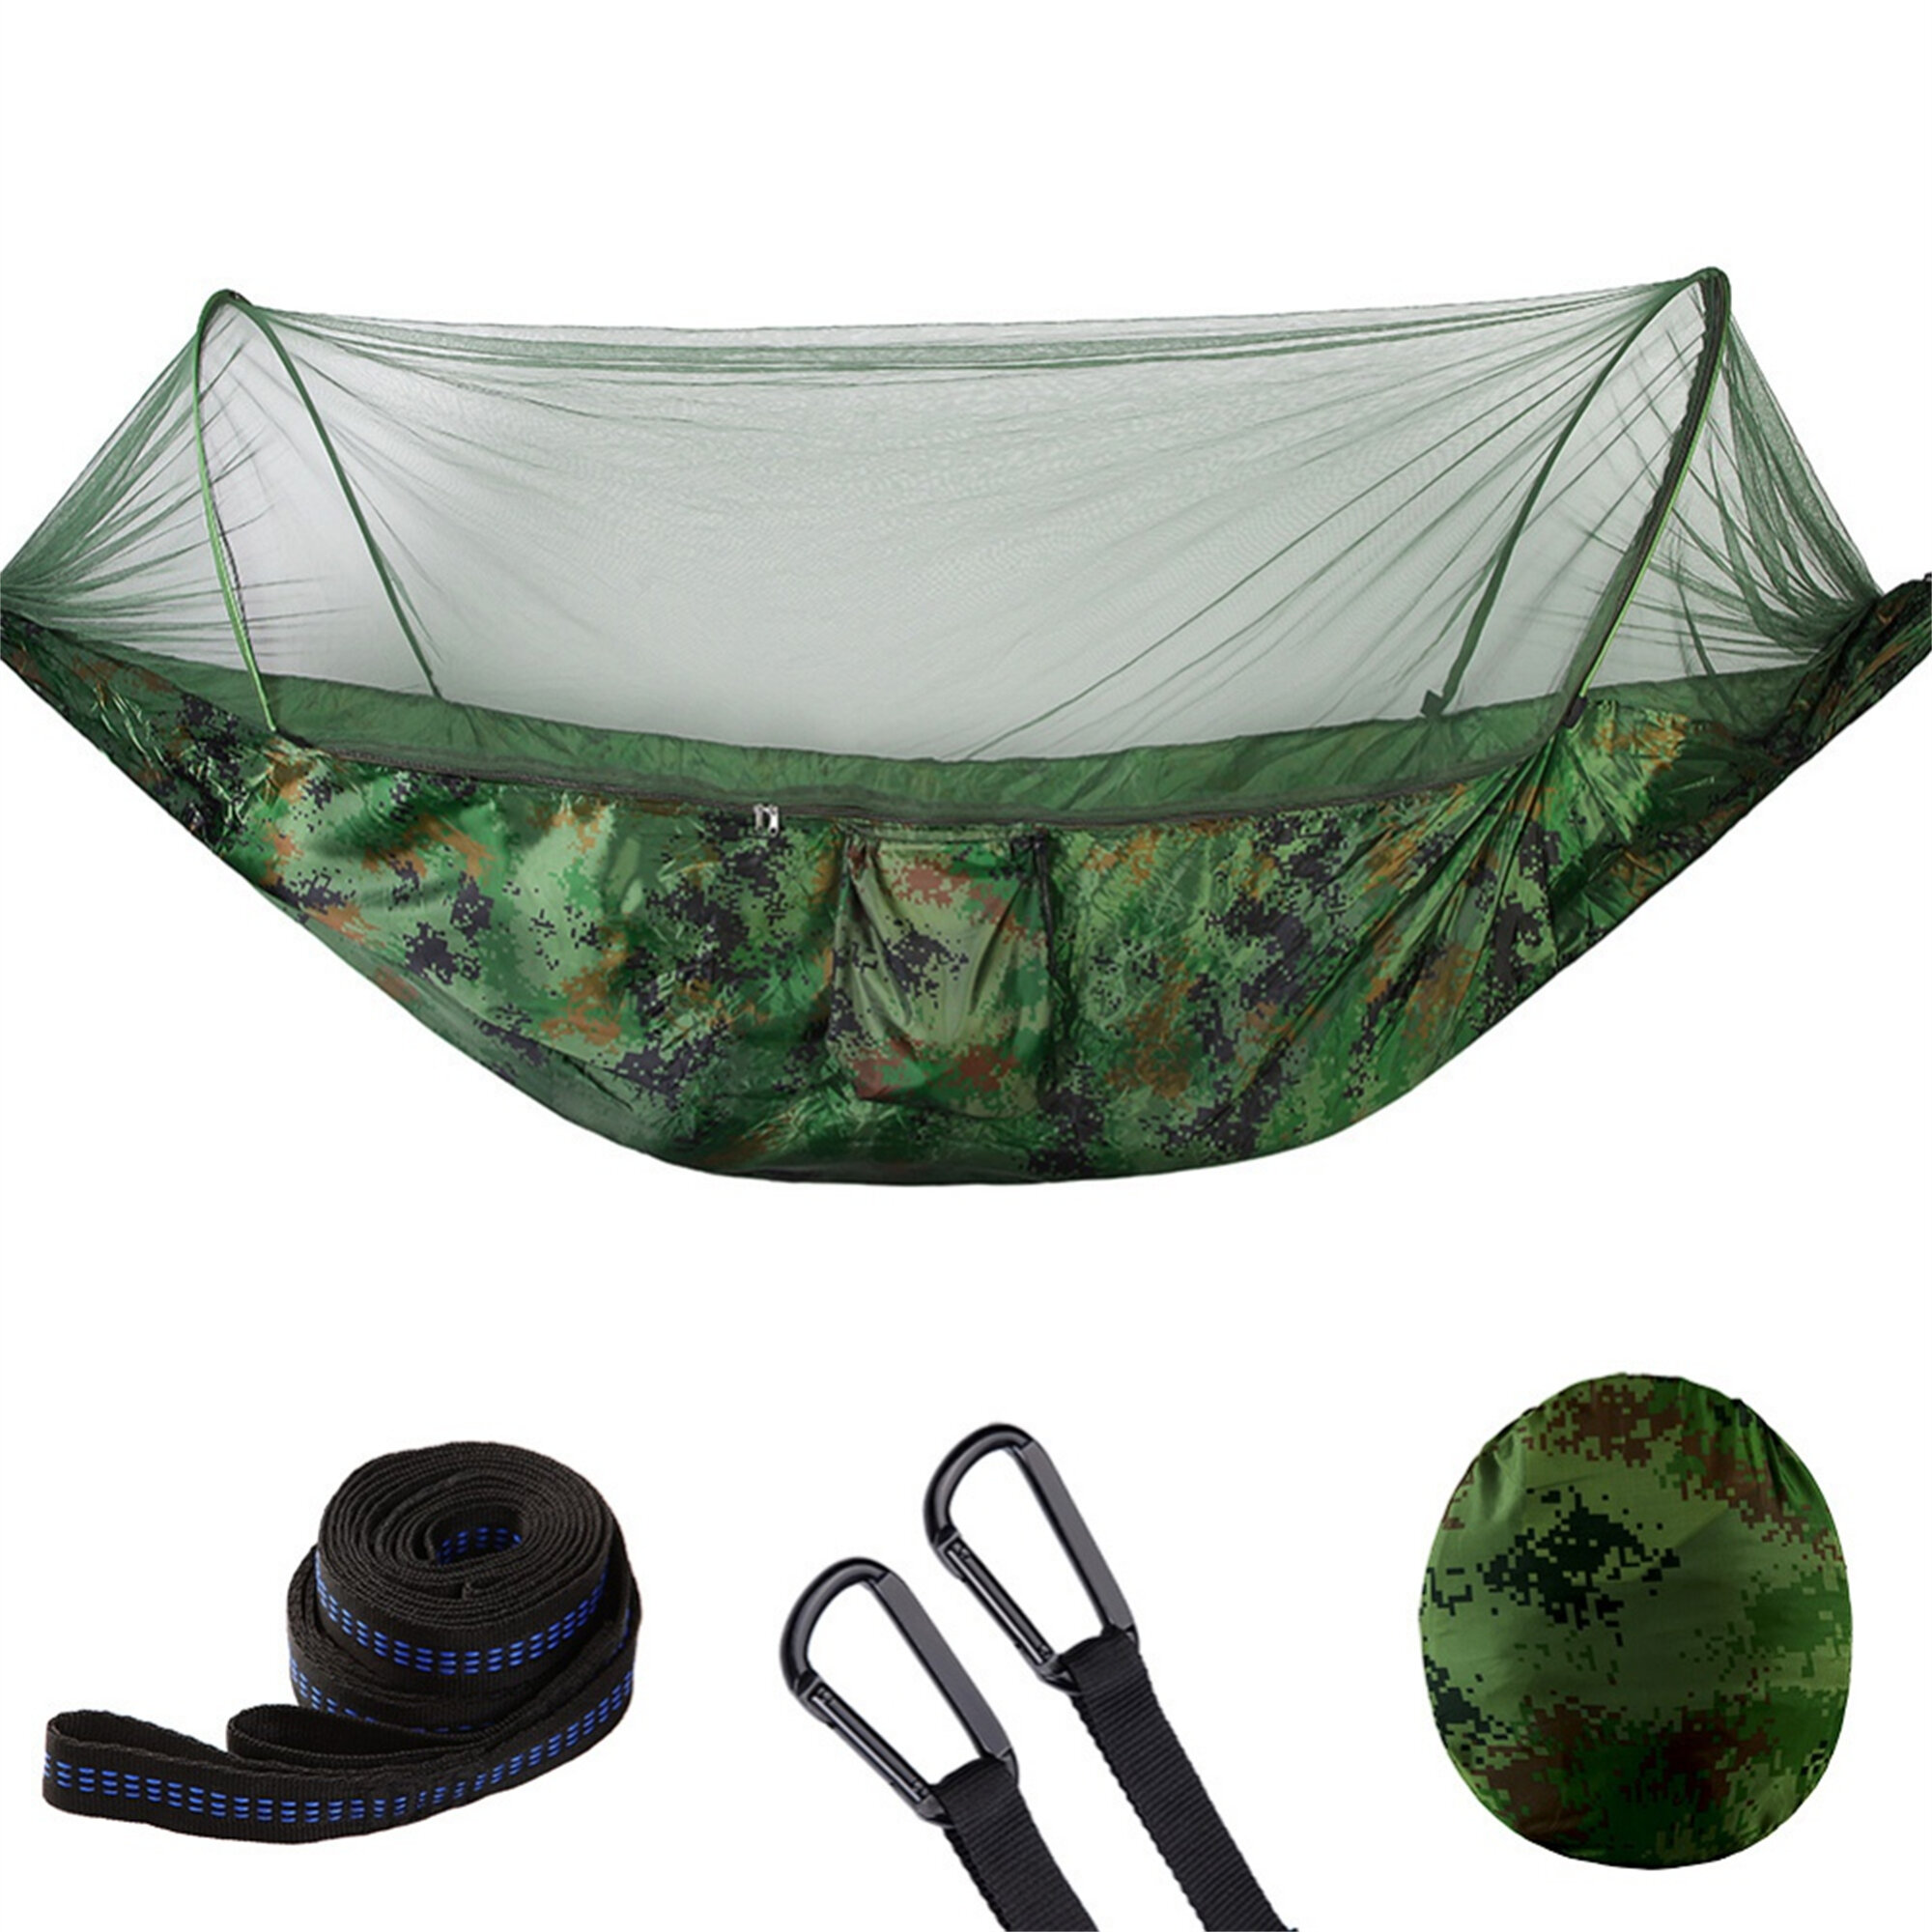 Outdoor Double Person Travel Camping Tent Hanging Hammock Beds Mosquito Net 